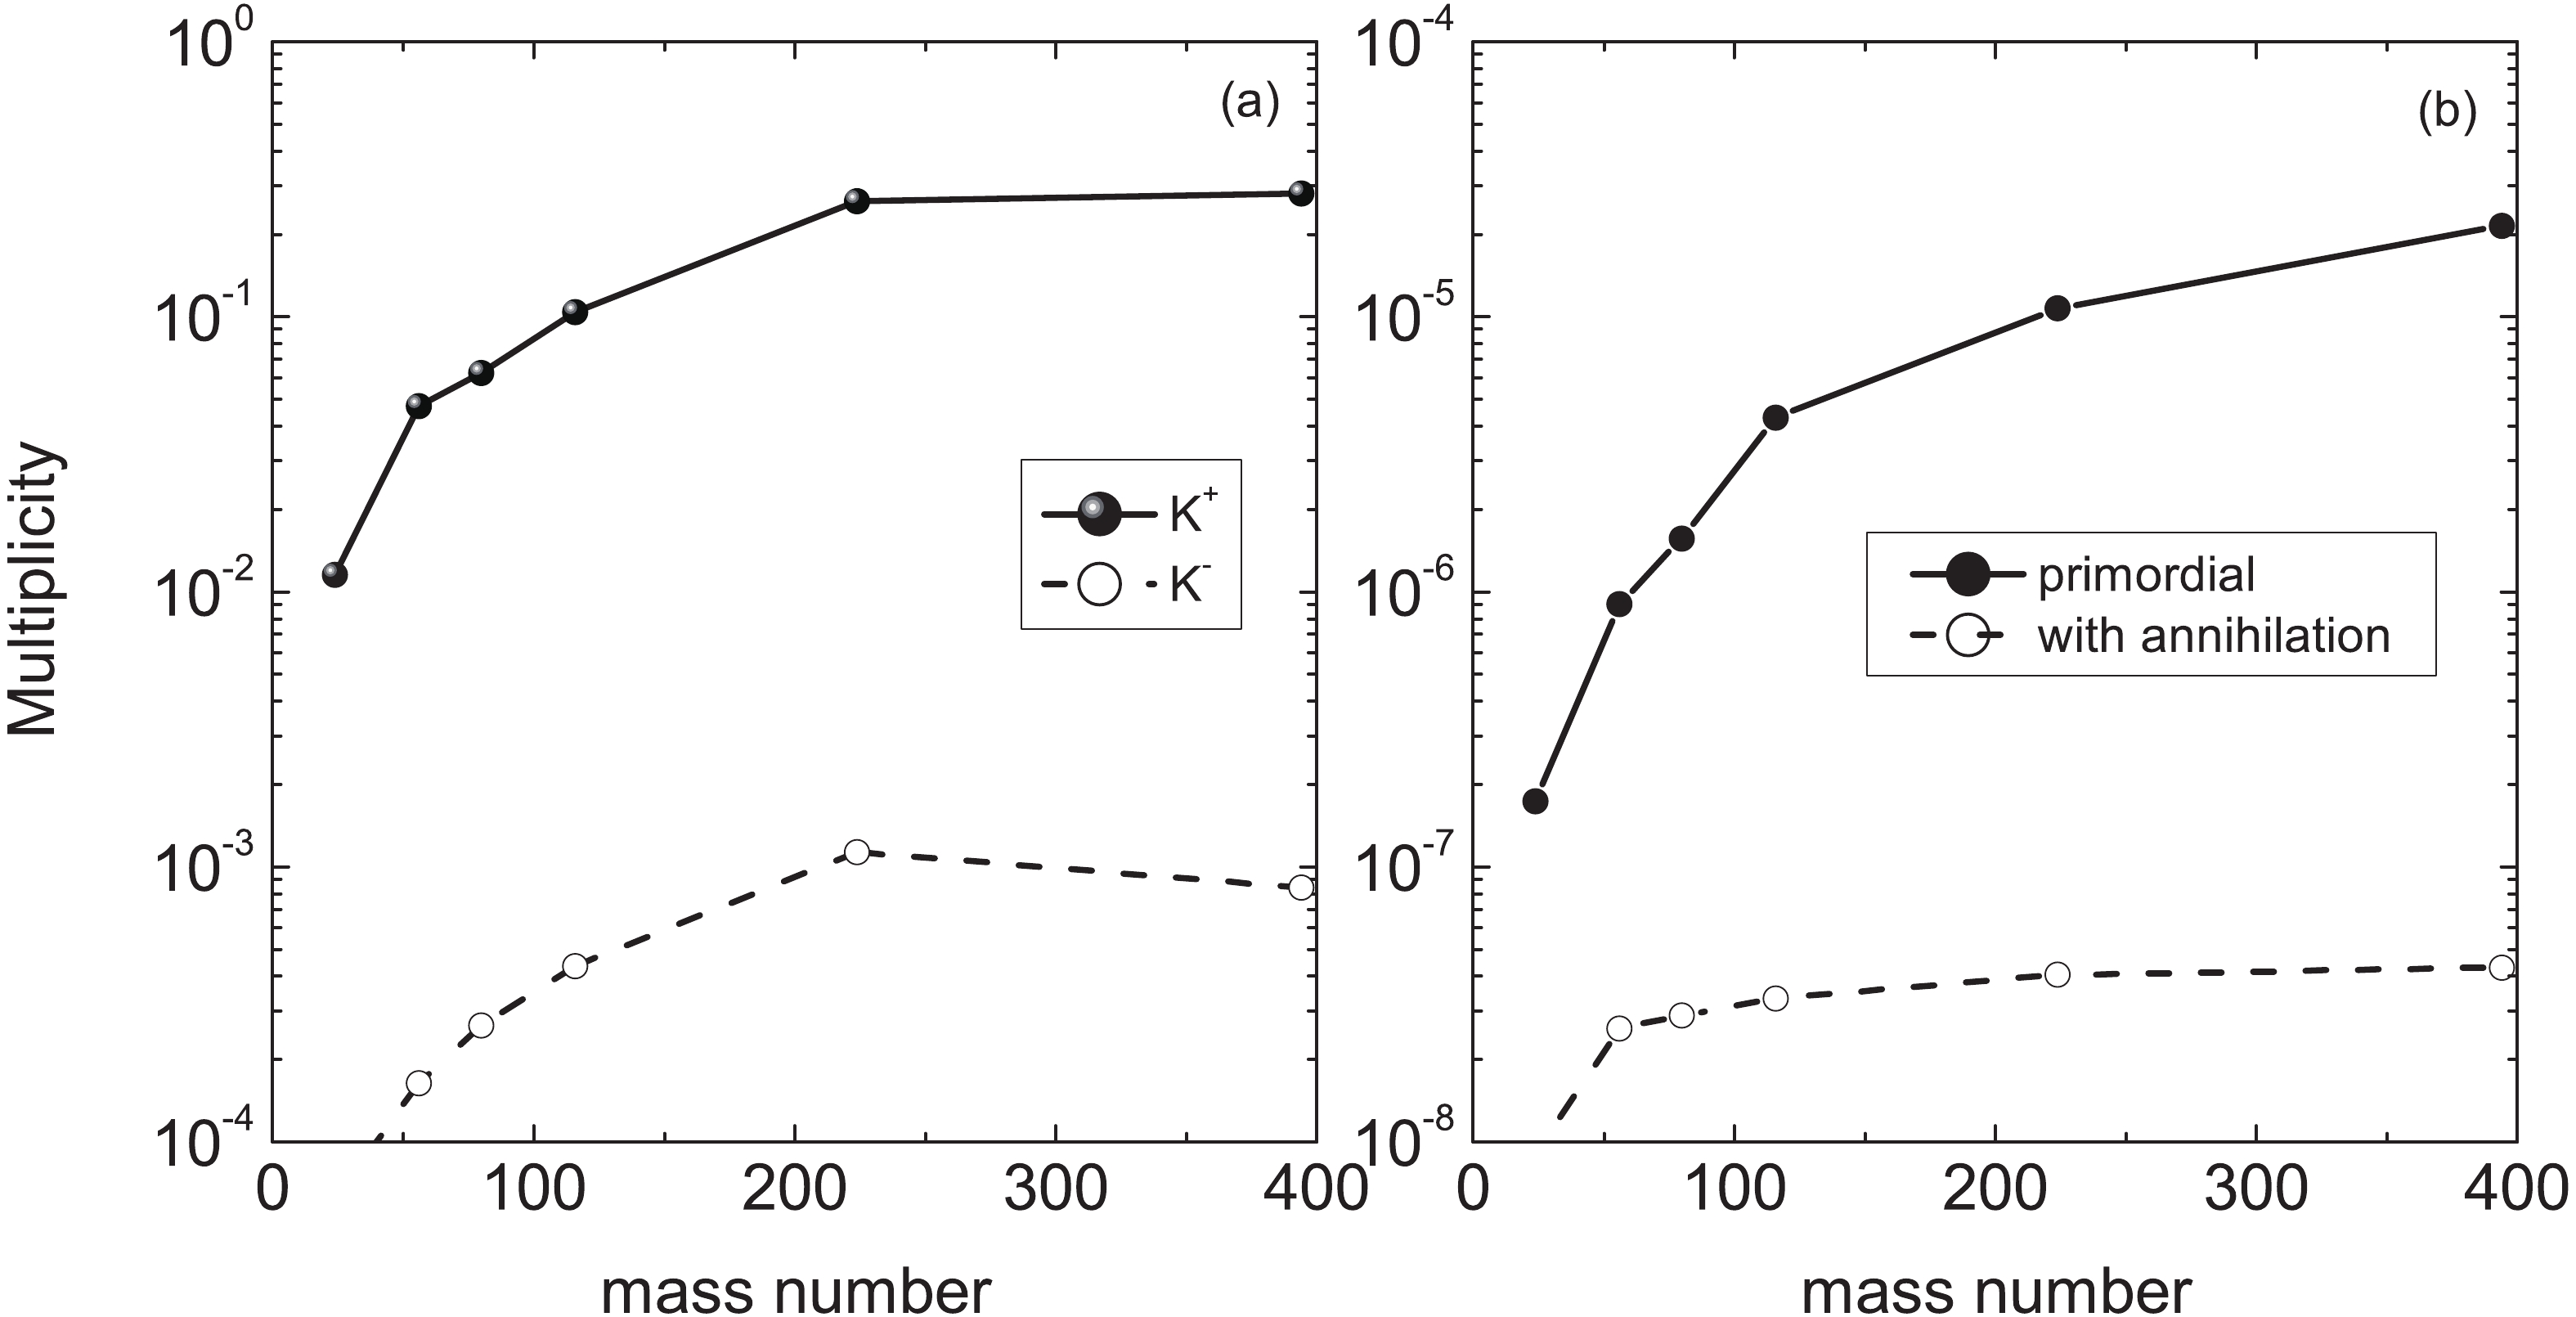 Mass dependence of K+, K-, primordial antiprotons and annihilation antiprotons at the incident energy of 2 GeV/nucleon.